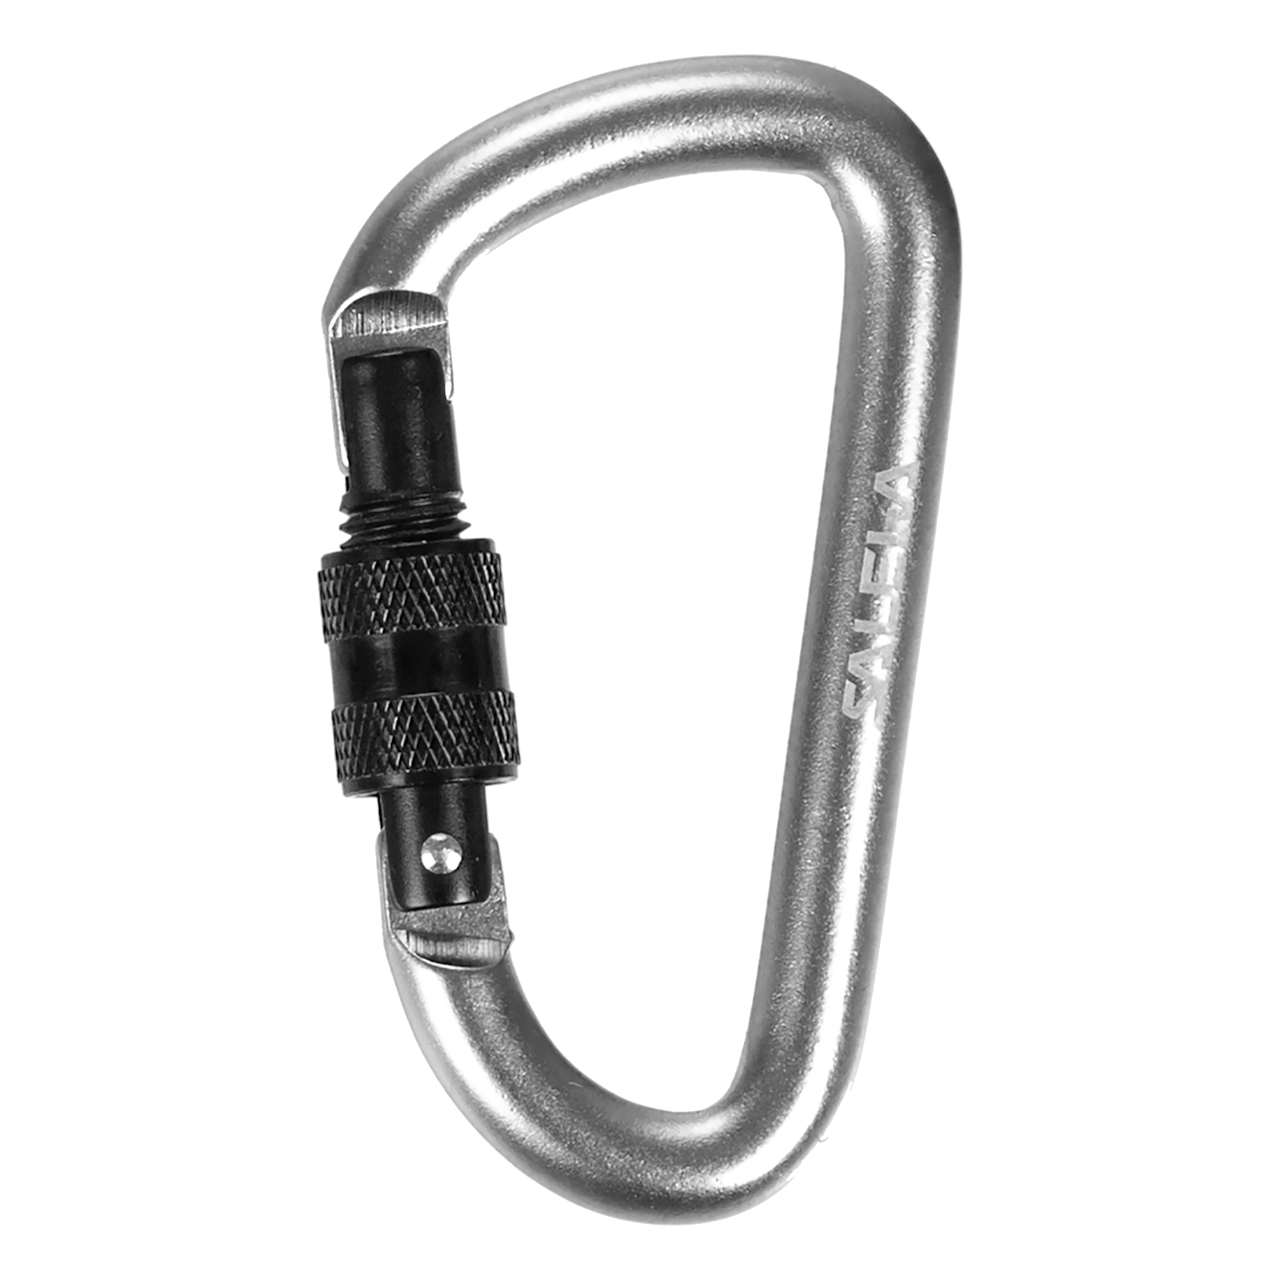 D-Shape carabiner with screw